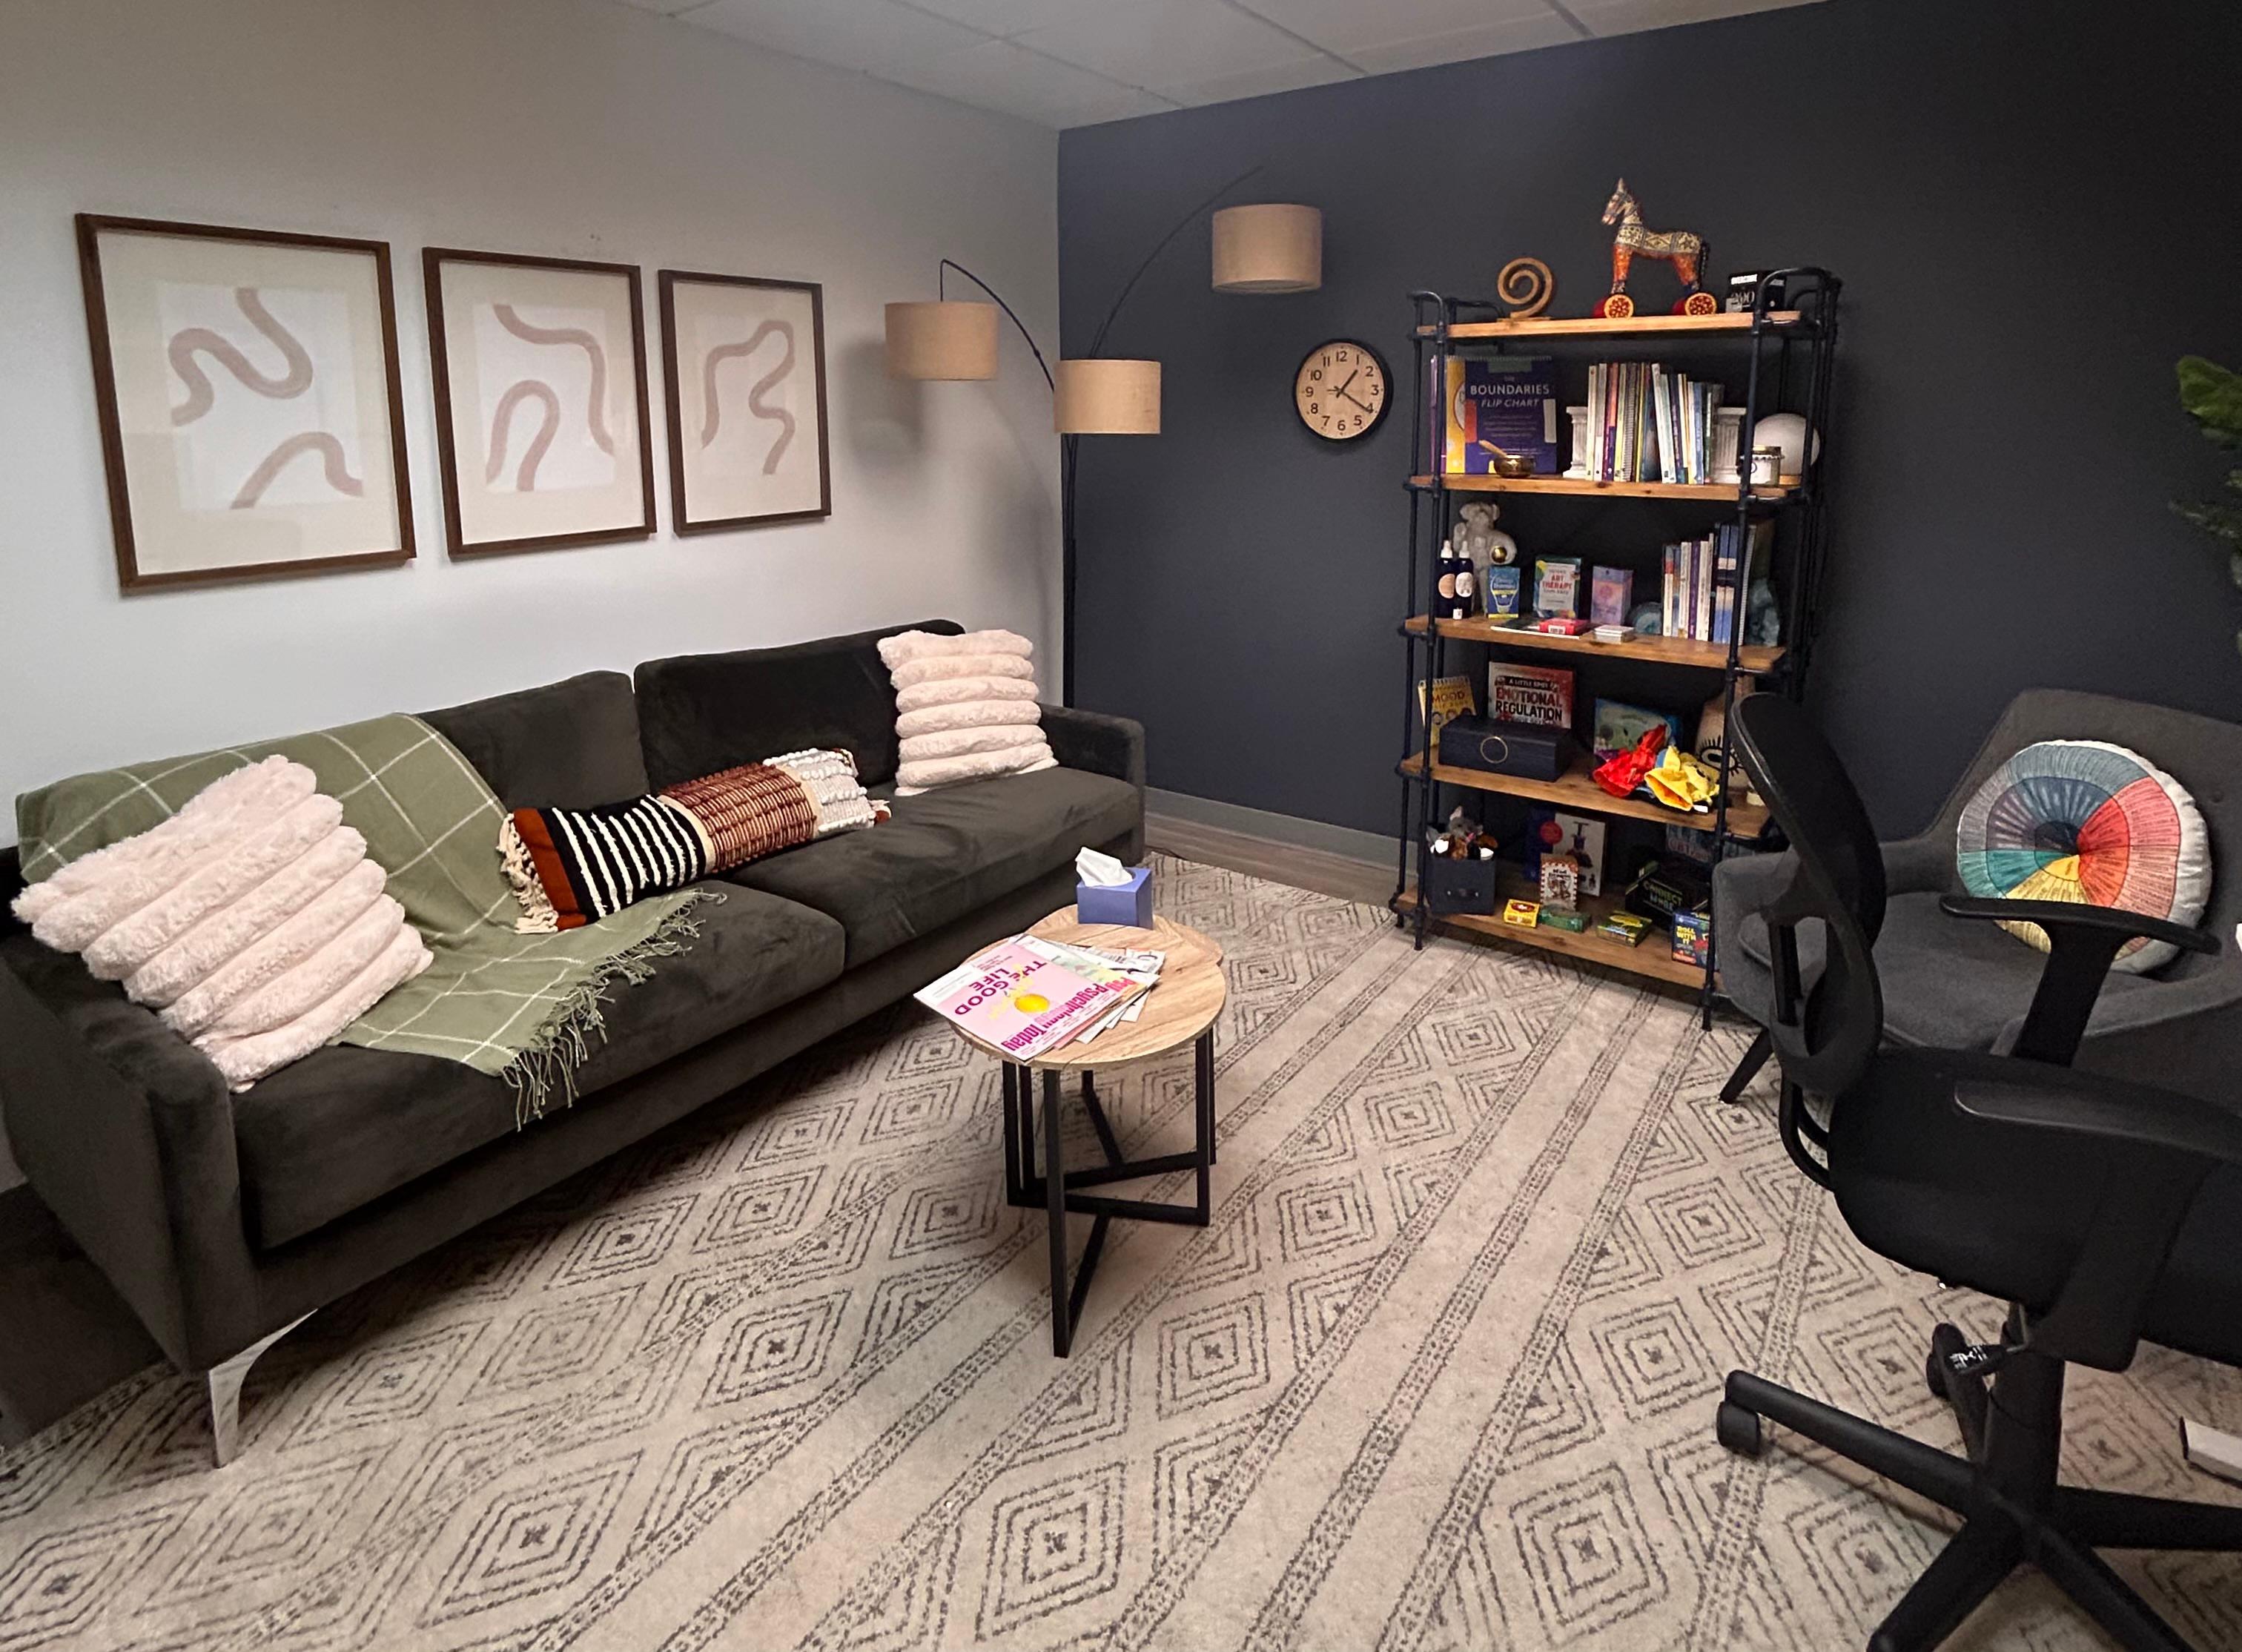 Therapy Room at Health For Life Counseling